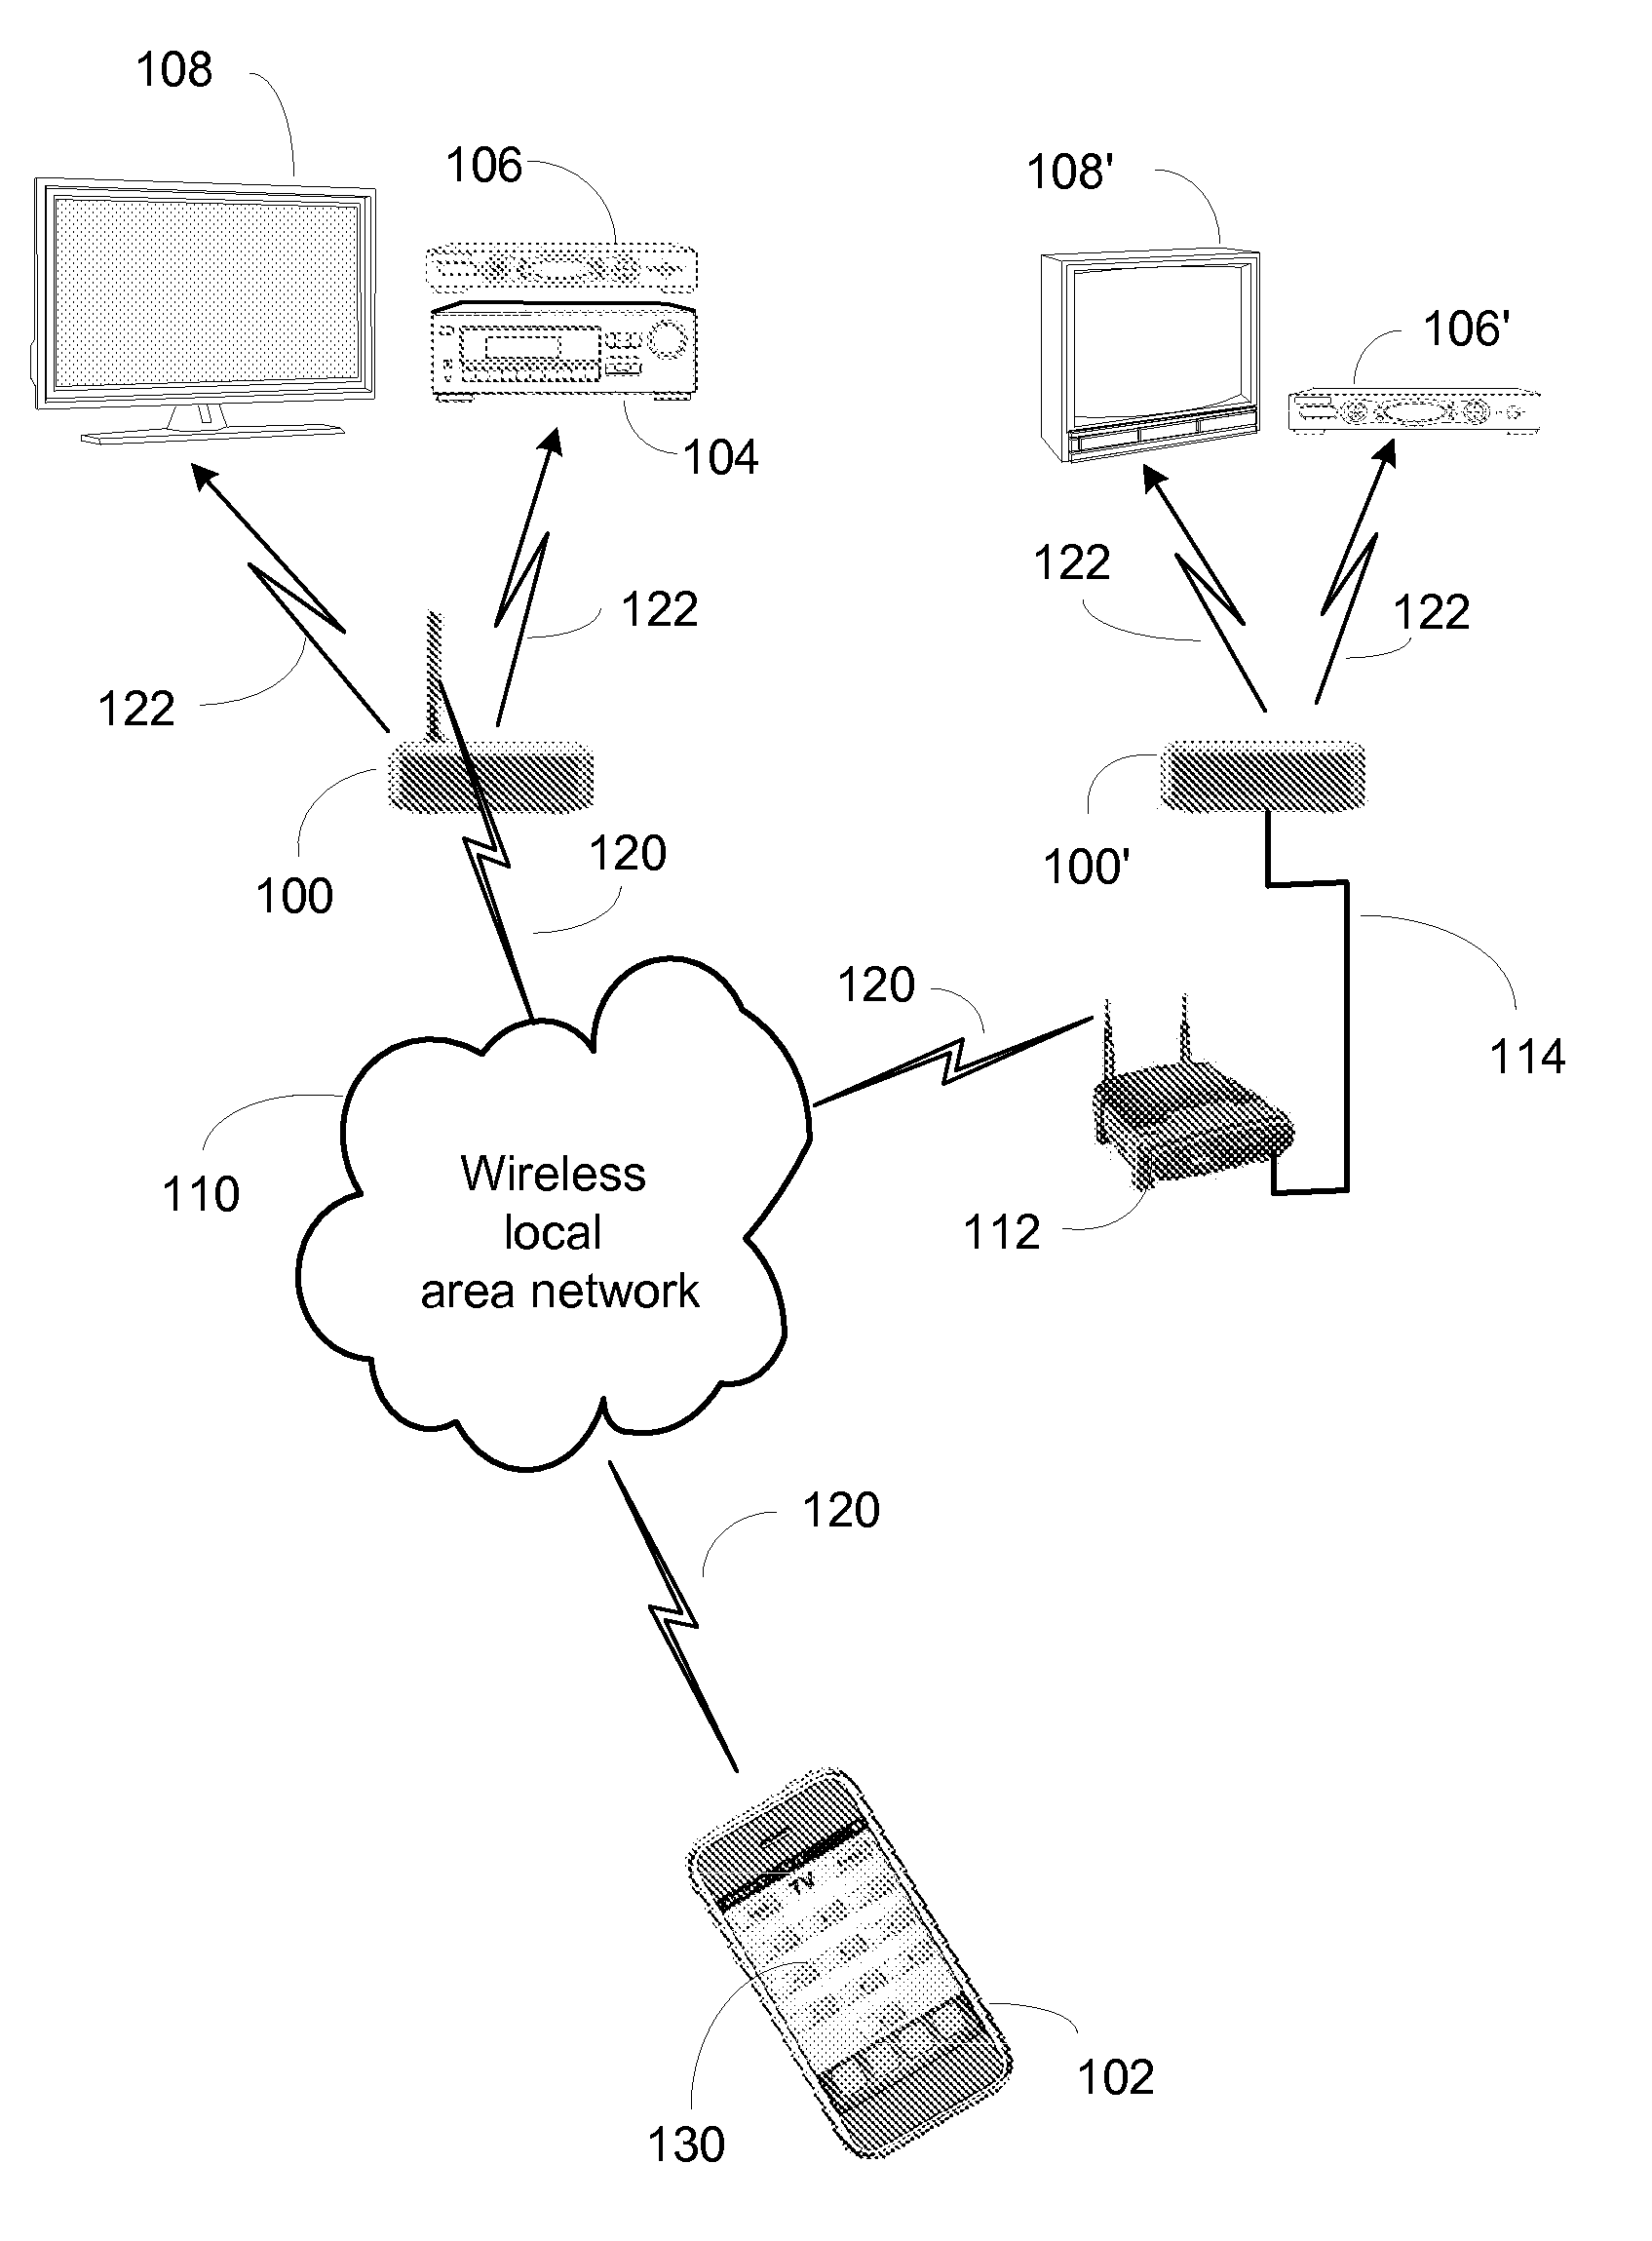 System and method for appliance control via a personal communication or entertainment device